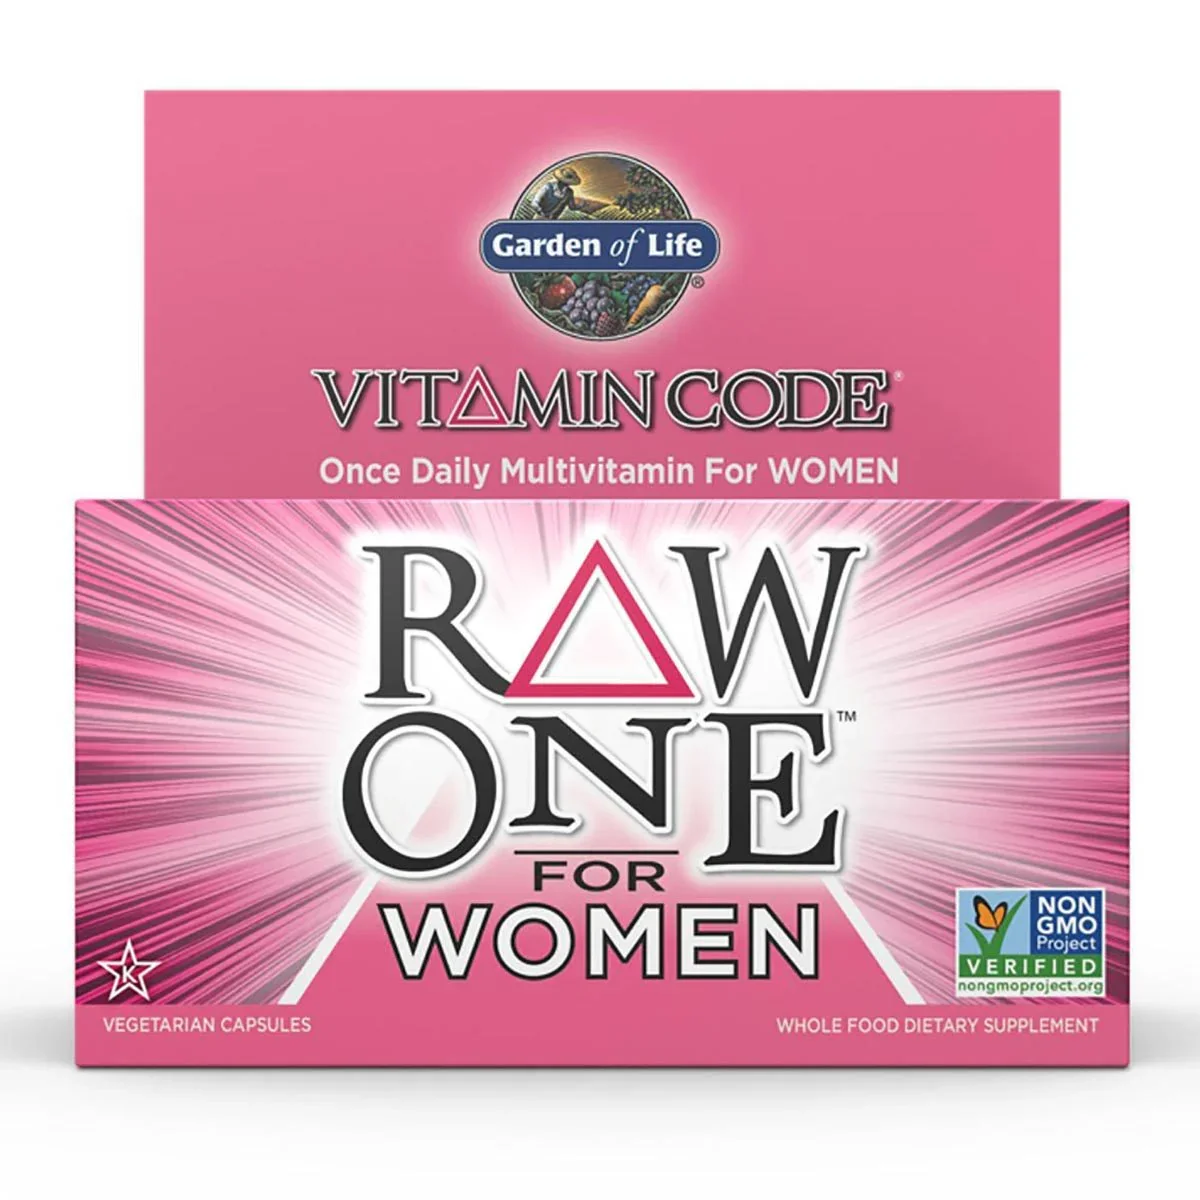 Image of Garden of Life Vitamin Code Raw One for Women 75 Caps